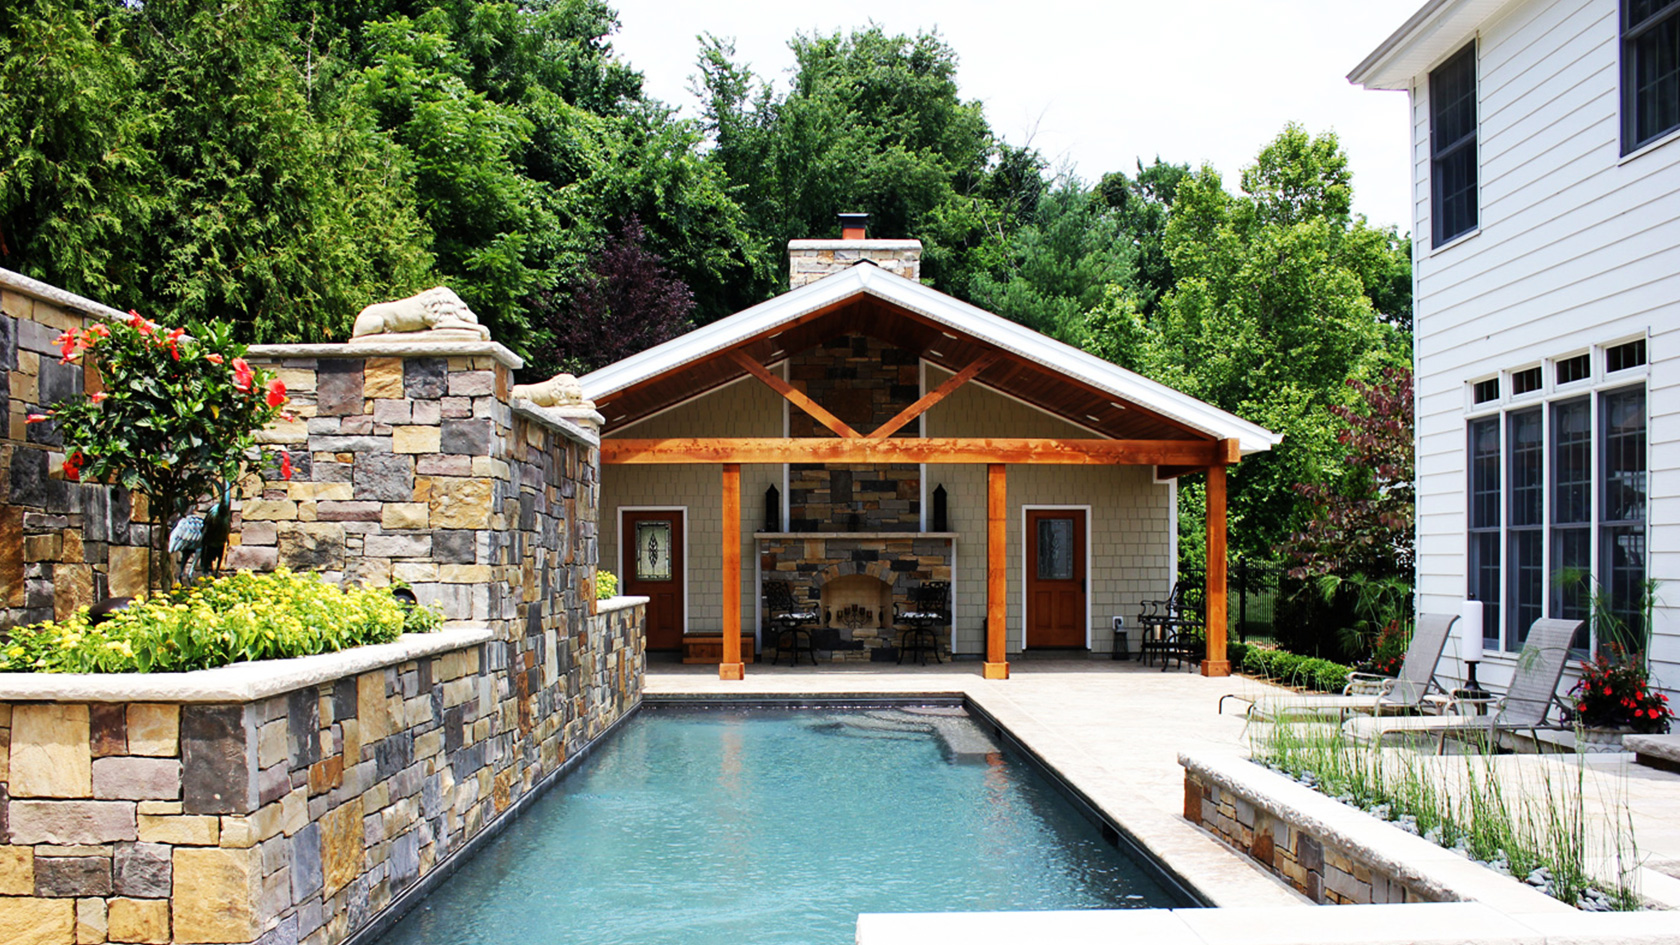 Pool House St. Louis - Pool House Builder St. Louis - Pool House Designer St. Louis